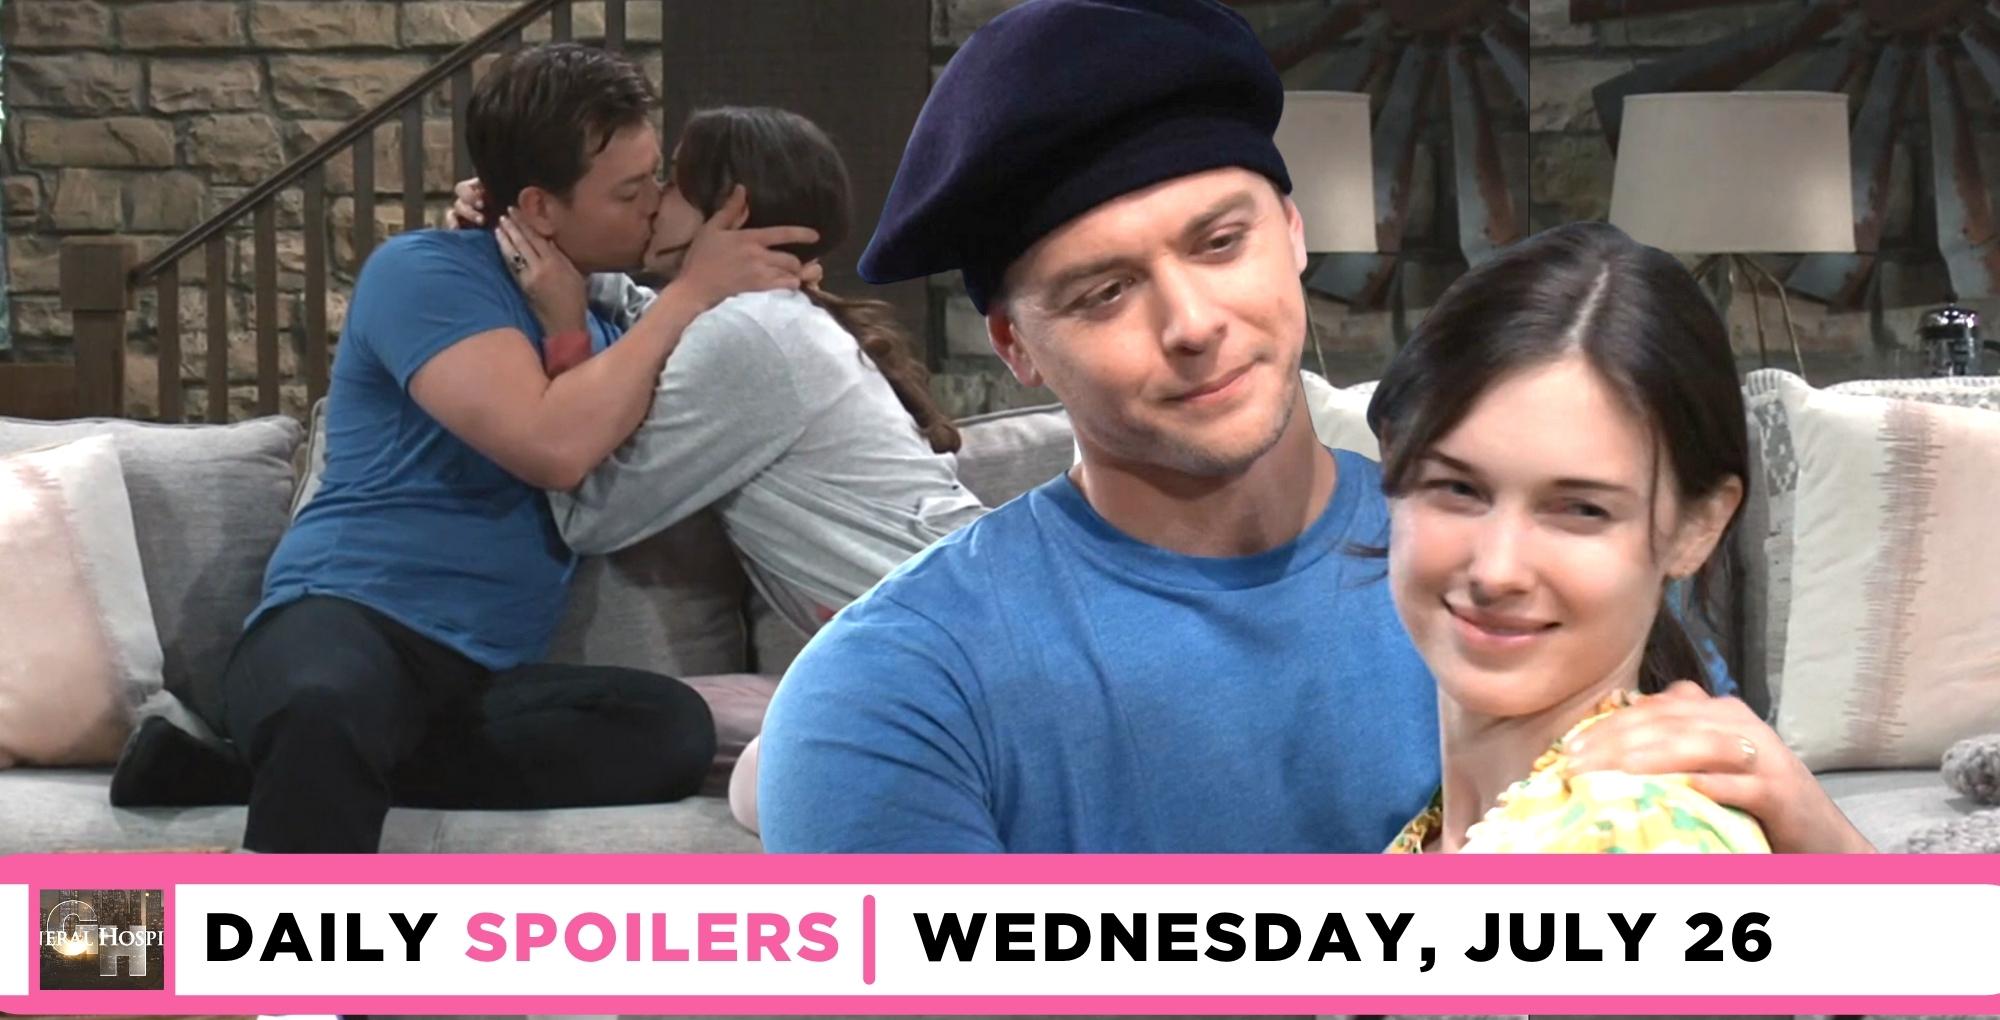 general hospital spoilers for july 26, 2023, has michael and willow getting closer.